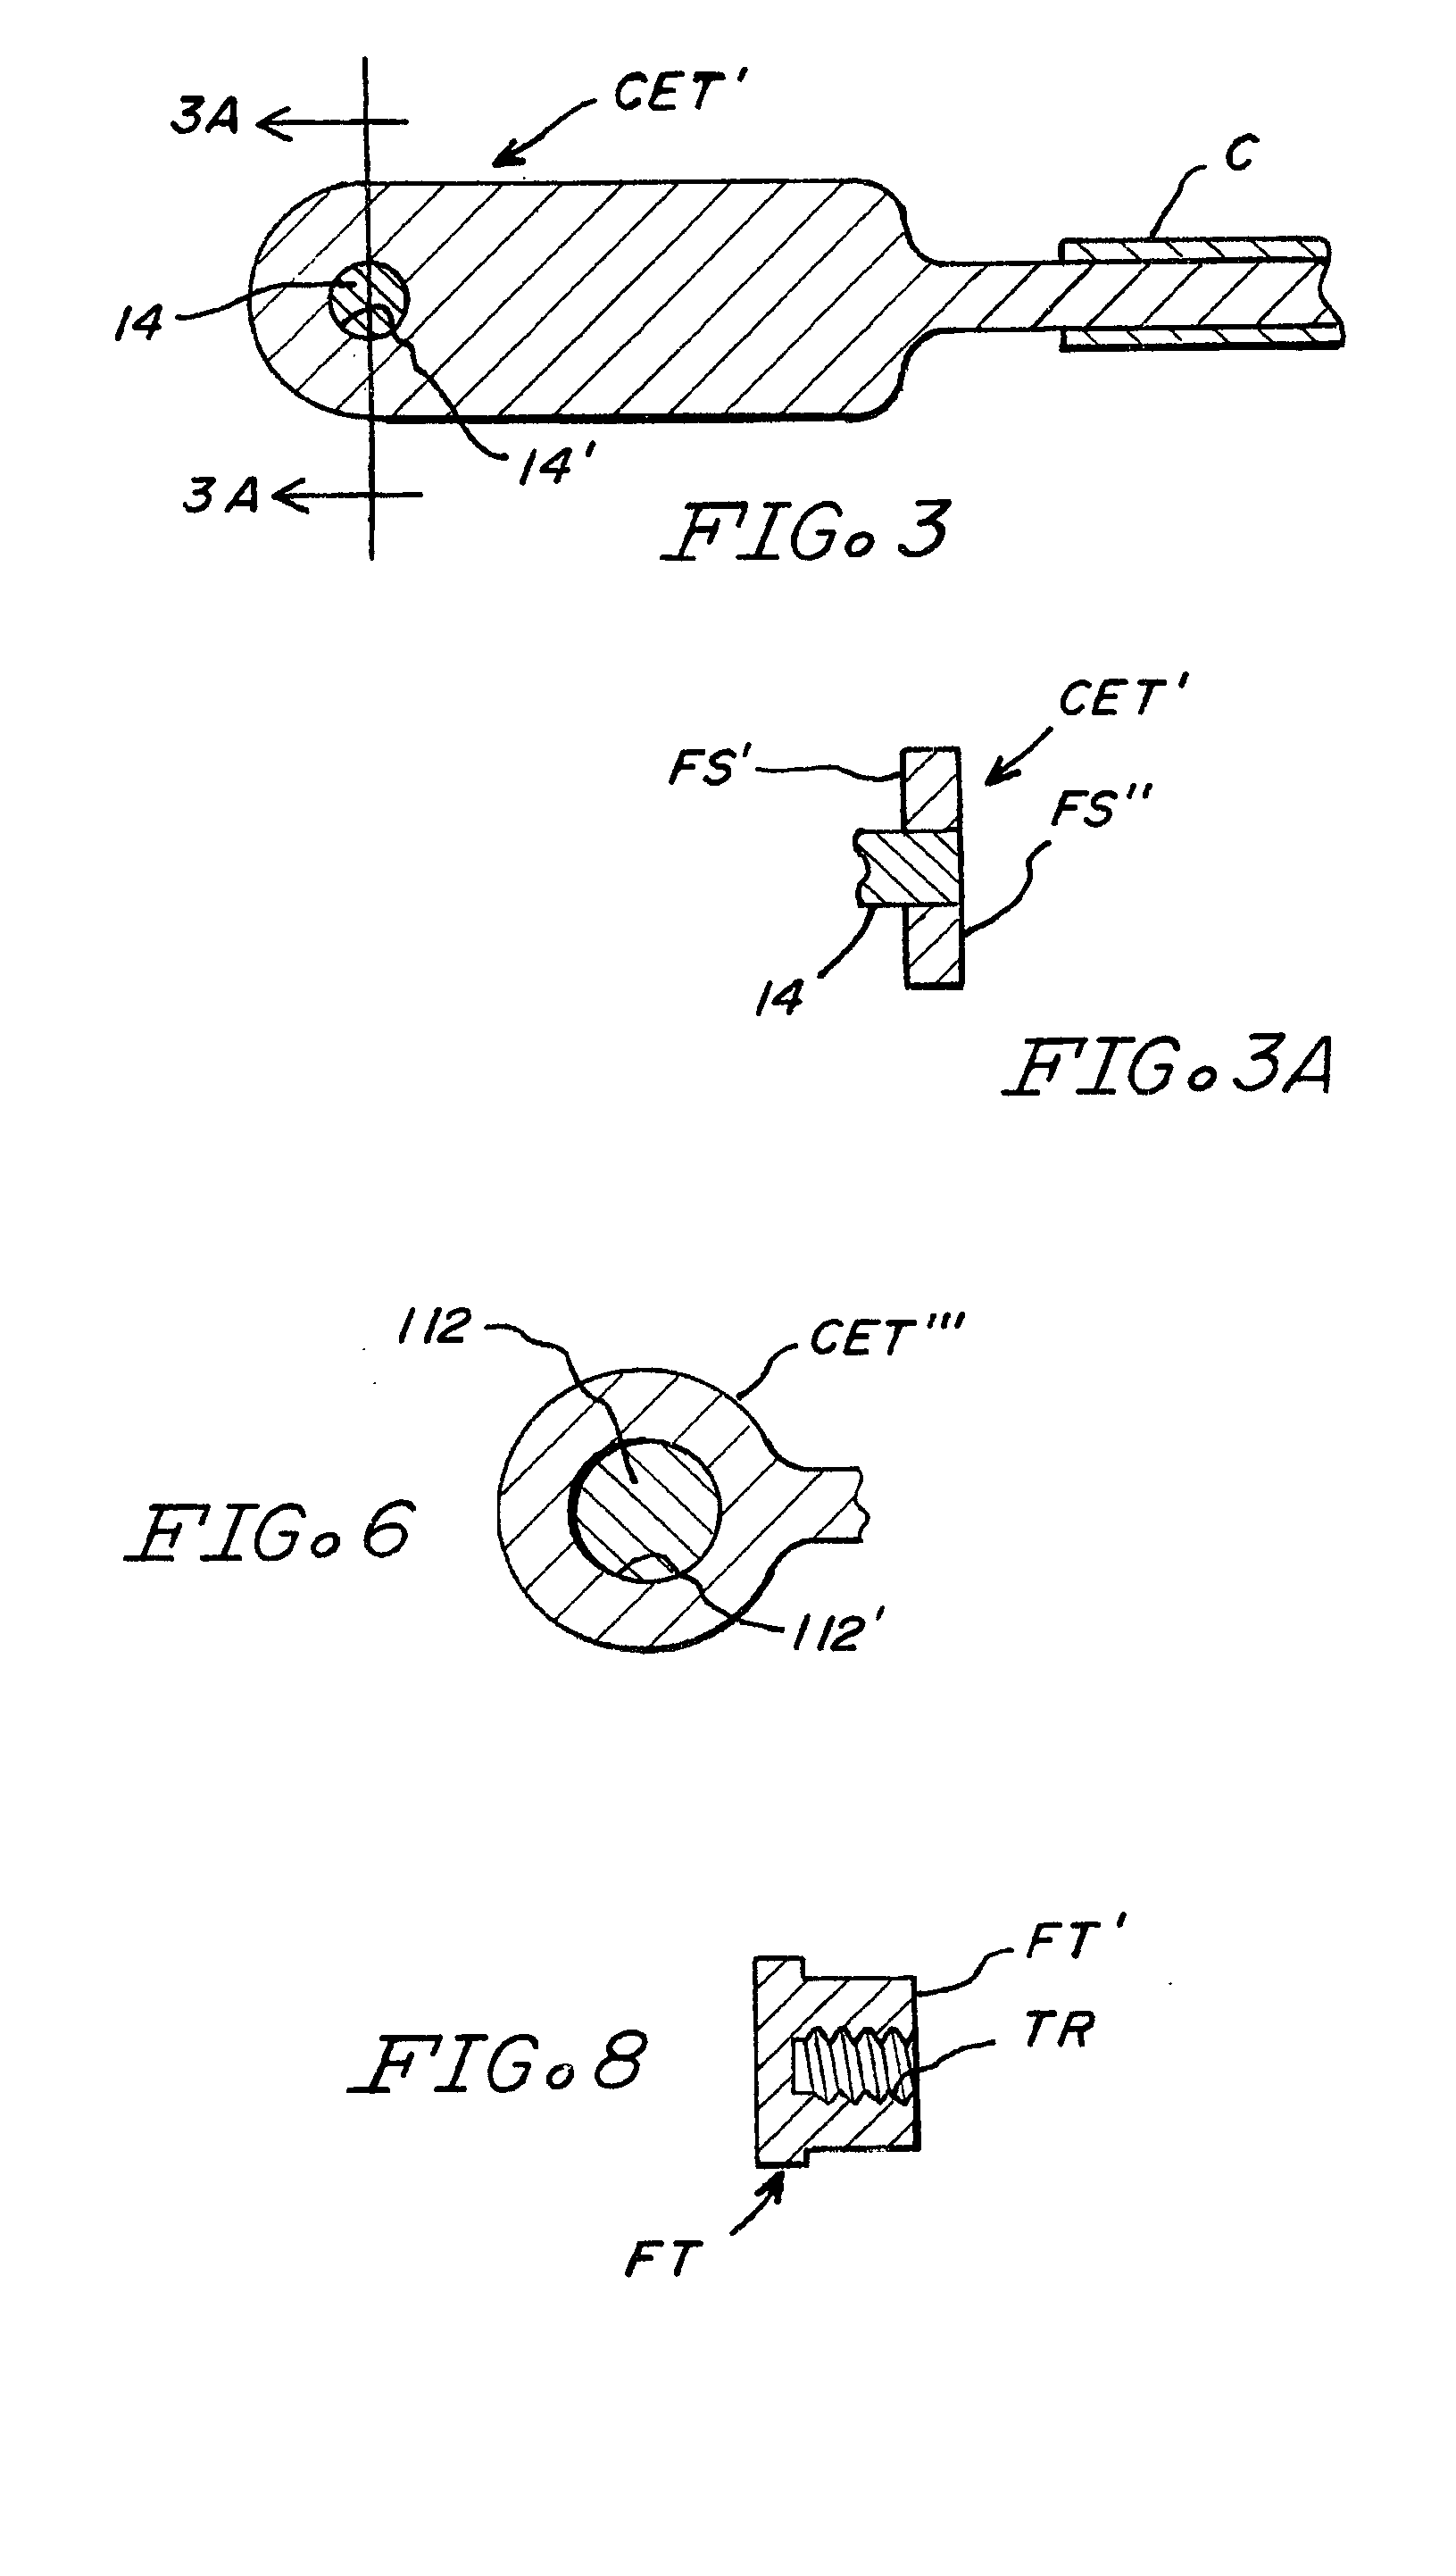 Tool-less terminal connector for side mount-type battery